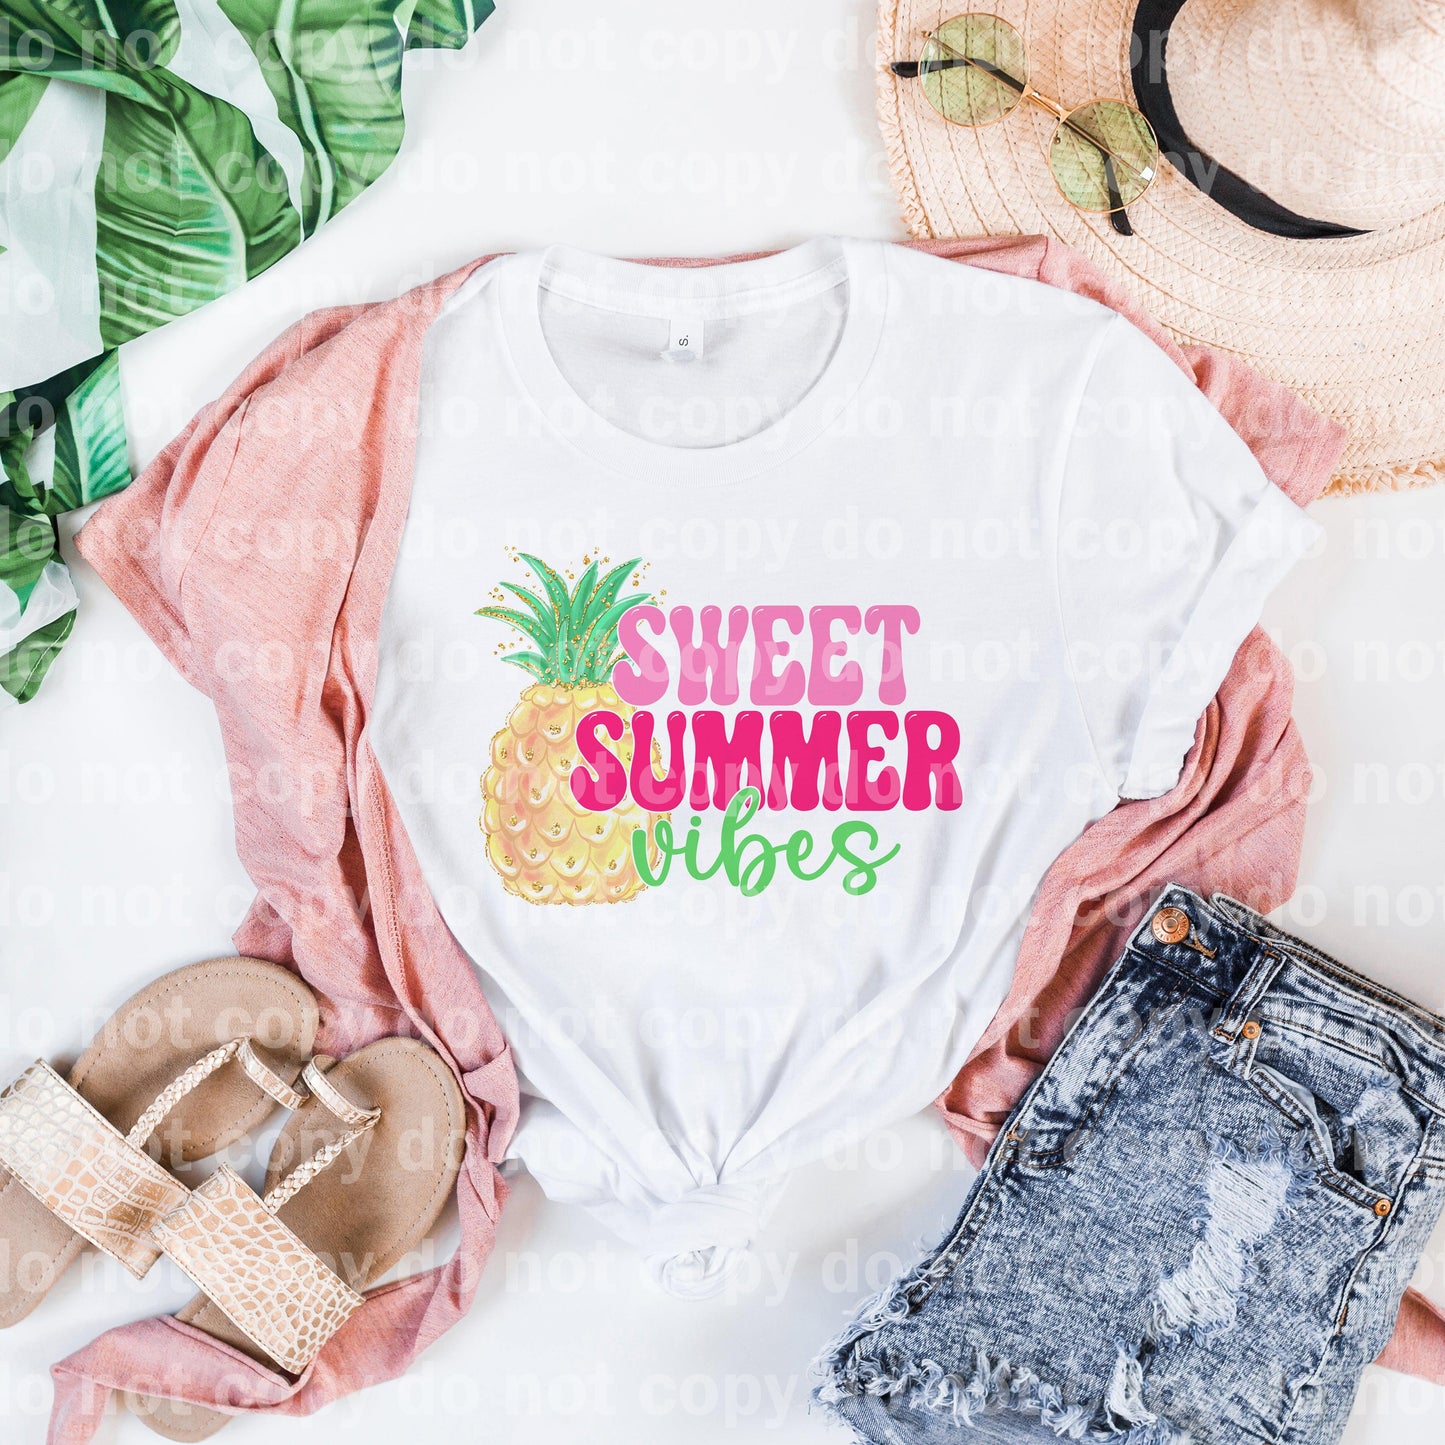 Sweet Summer Vibes Dream Print or Sublimation Print